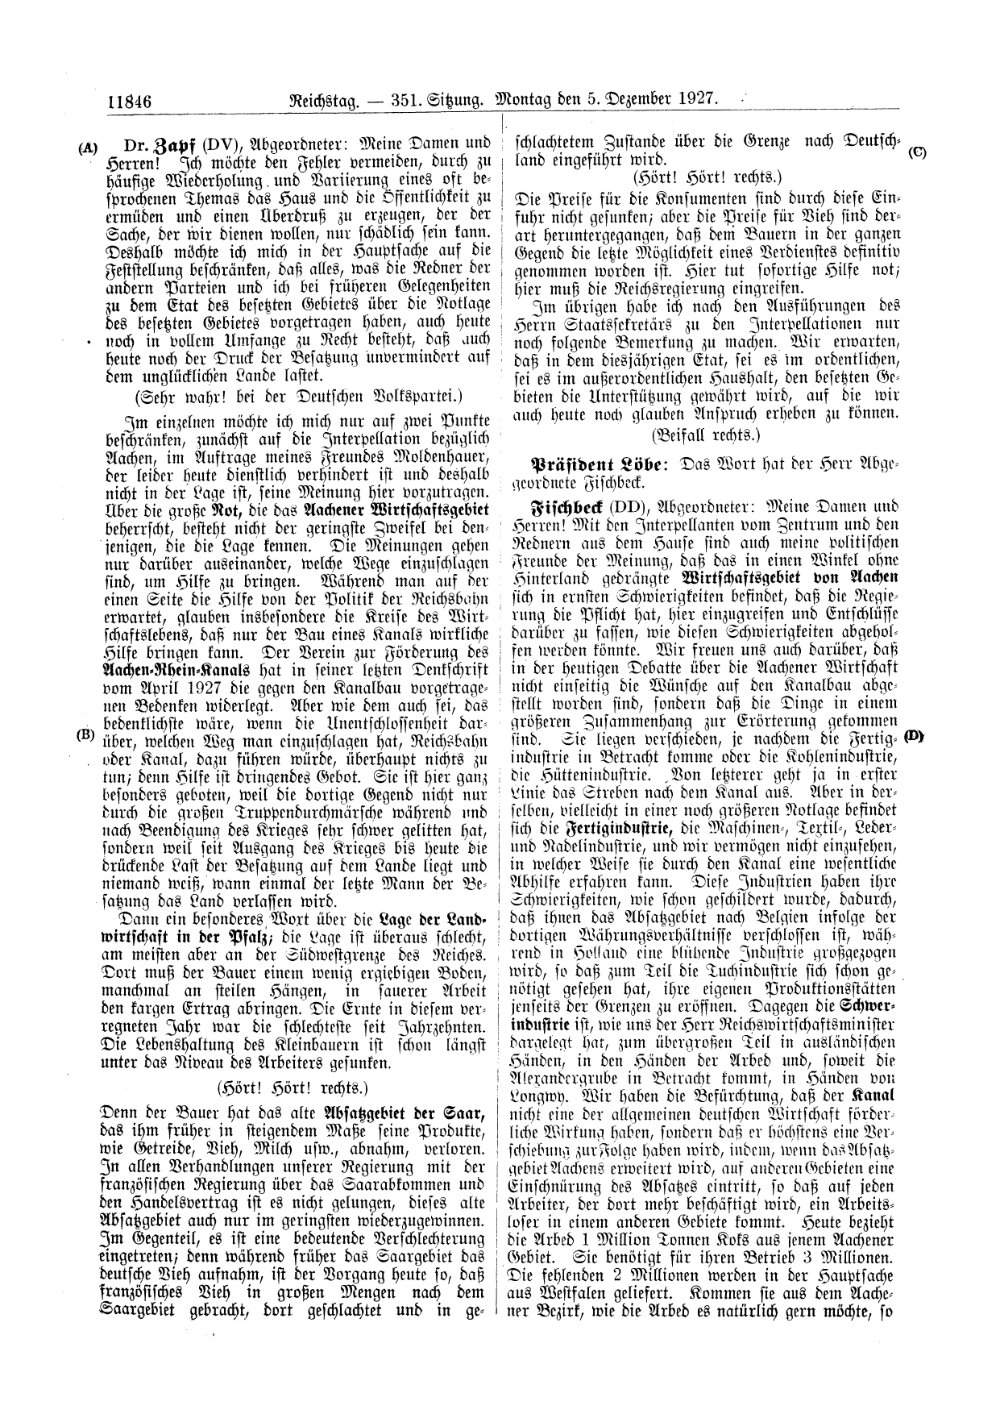 Scan of page 11846